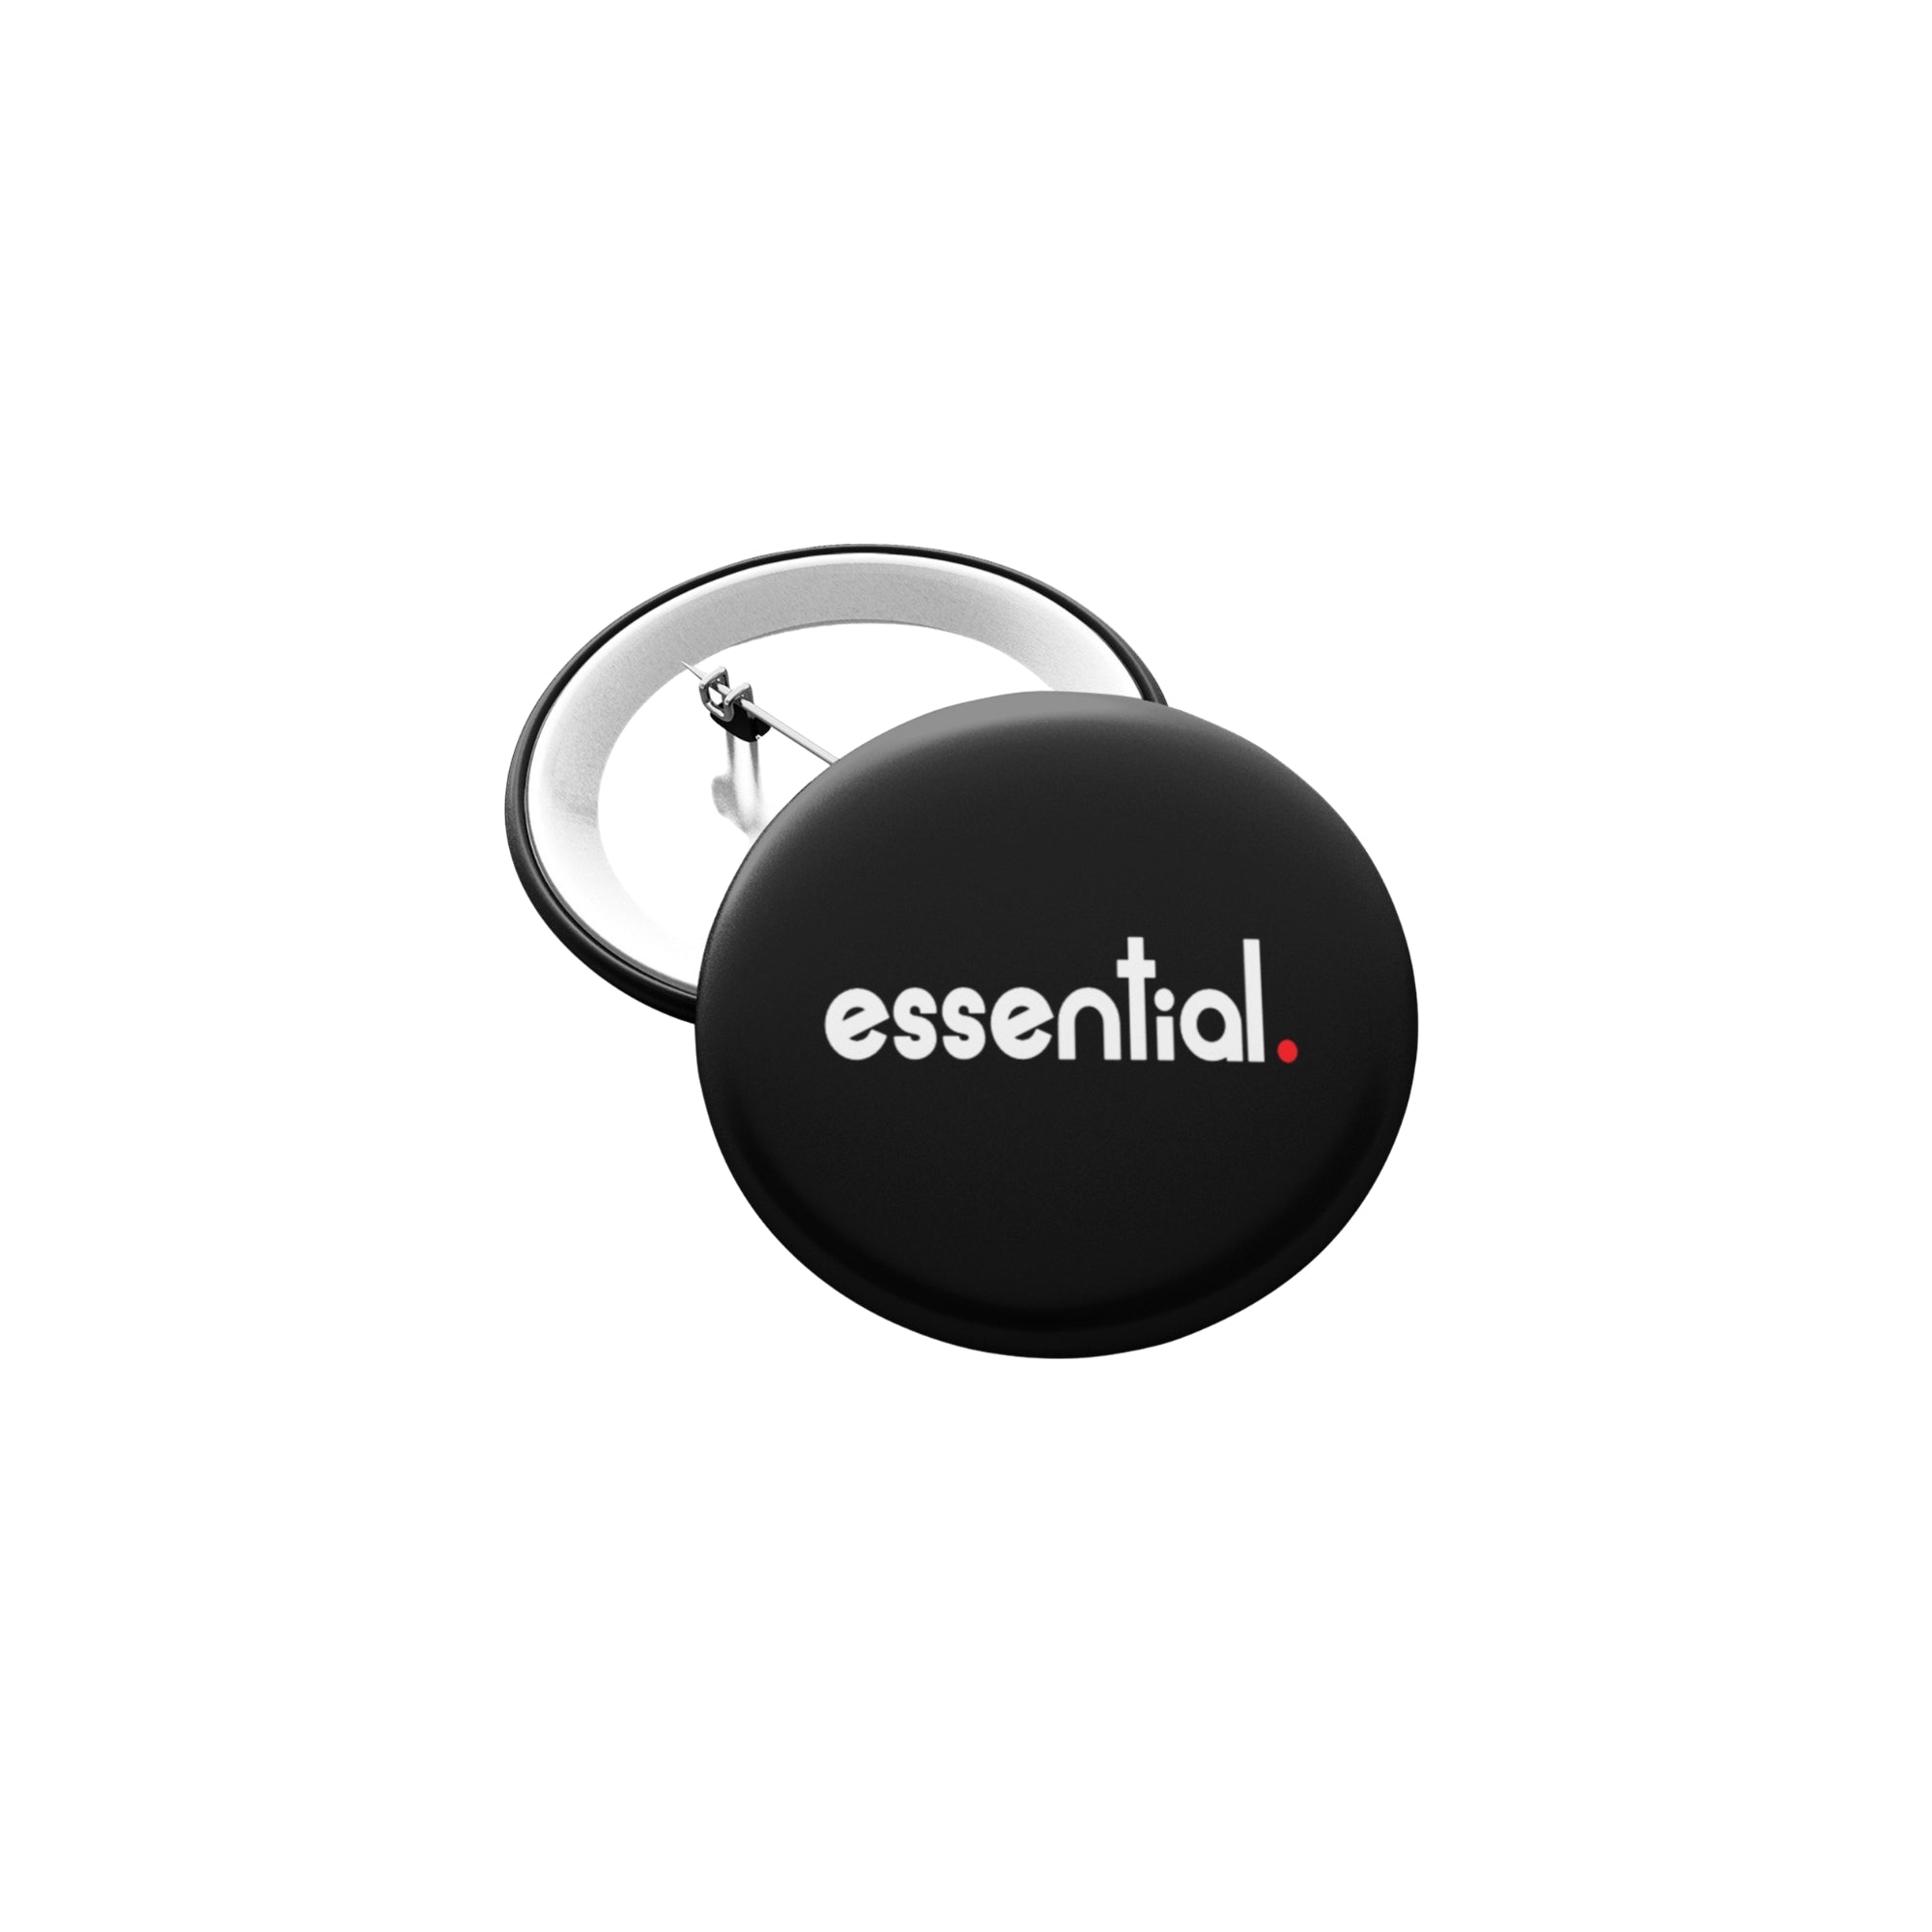 ESSENTIAL - 1.5" Pin-Back Button - IAMLUVbyV